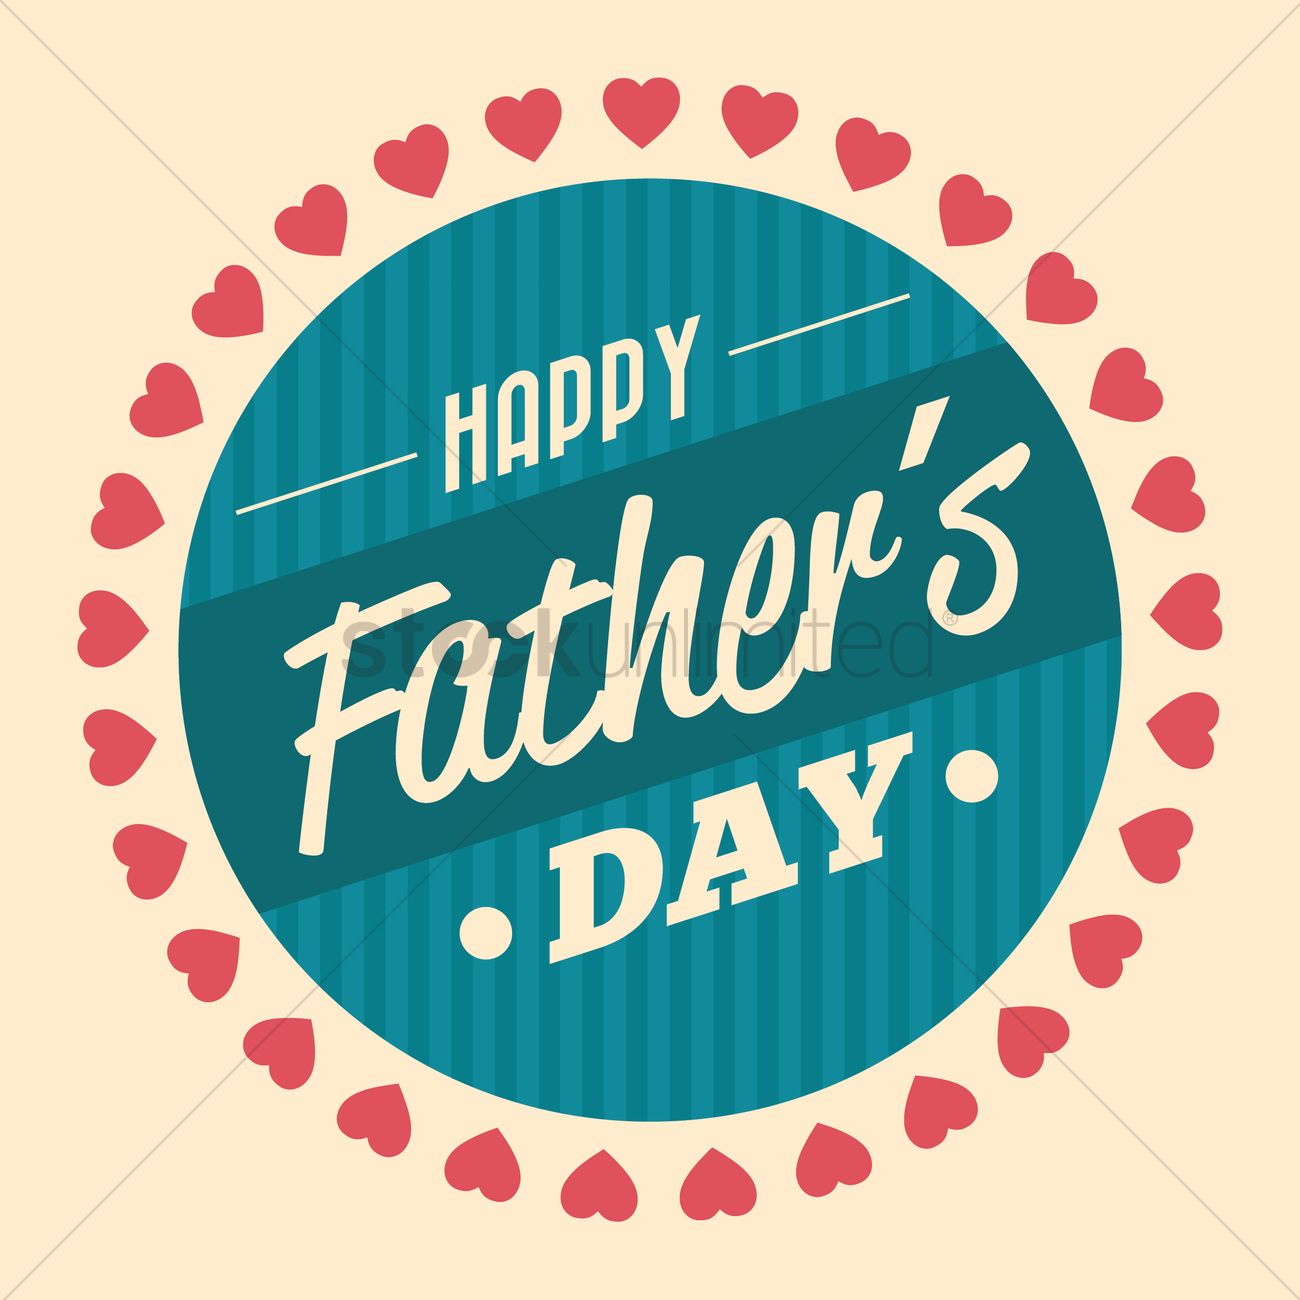 Free download Happy fathers day wallpaper Vector Image 1561979 StockUnlimited [1300x1300] for your Desktop, Mobile & Tablet. Explore Happy Father's Day Wallpaper. Happy Father's Day Wallpaper, Father's Day 2020 Wallpaper, Father's Day 2019